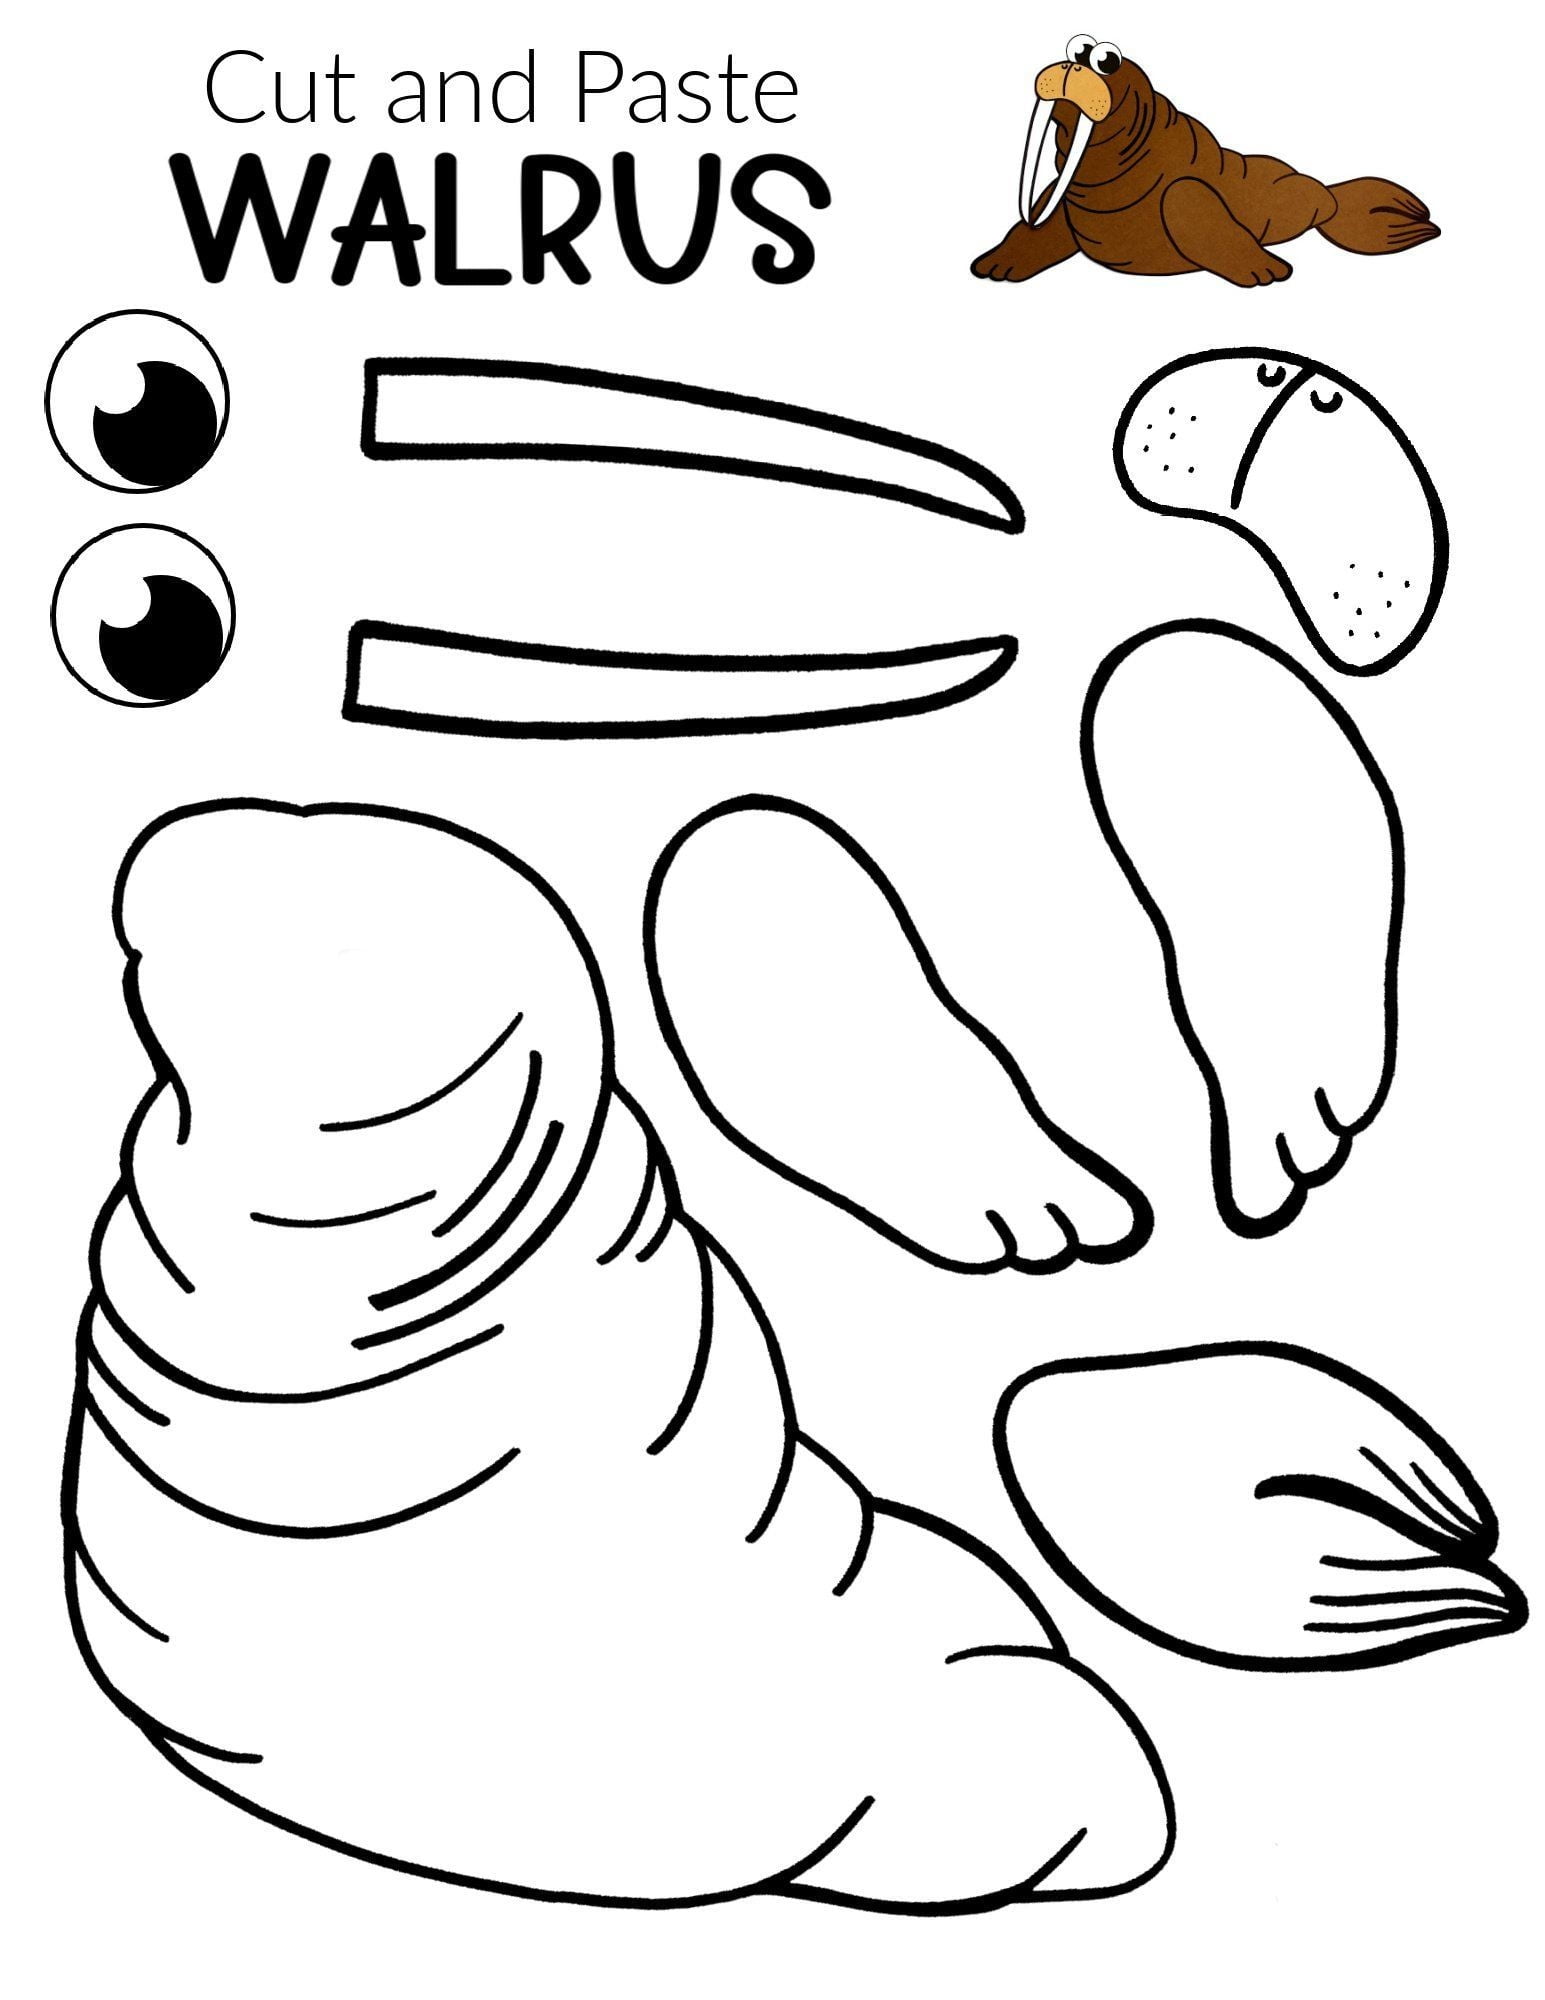 Free Printable Walrus Craft For Kids Arctic Animals Crafts Winter Animal Crafts Arctic Animals Preschool